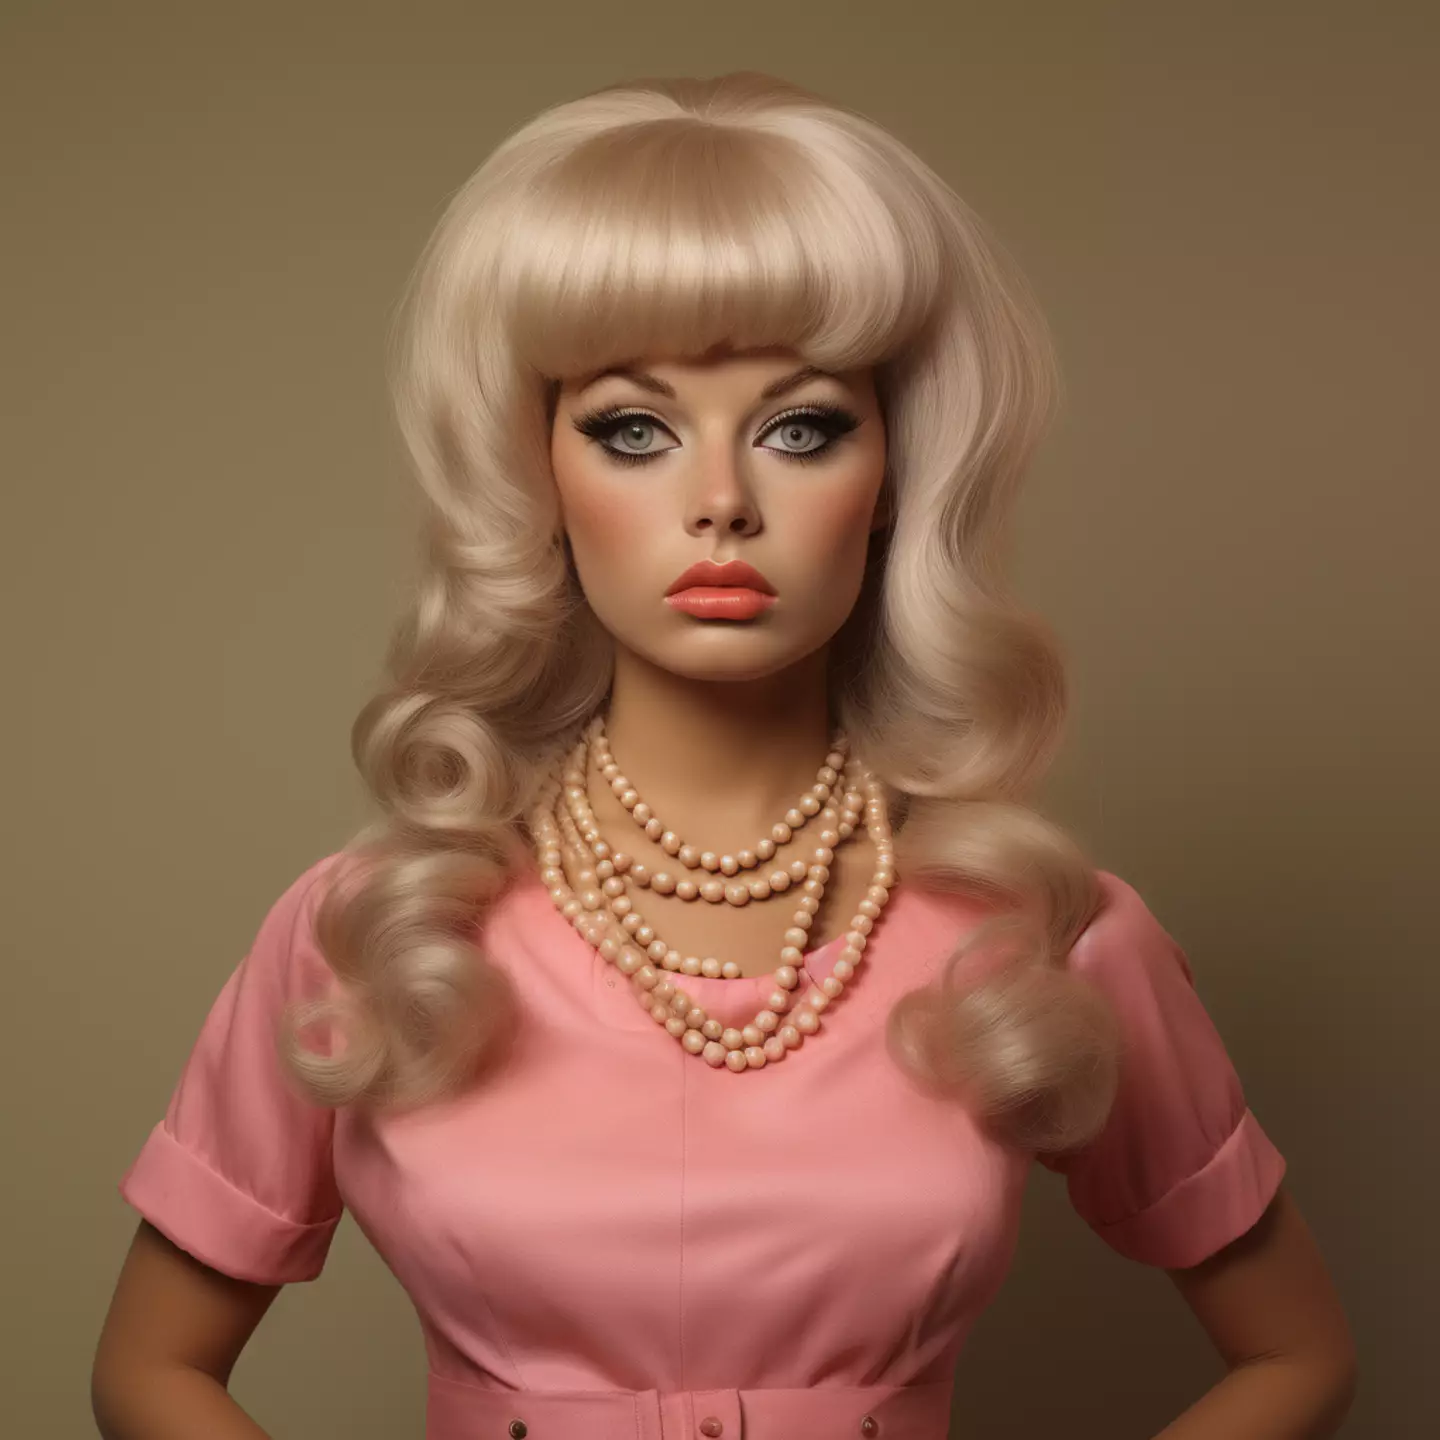 This Barbie is from Cardiff.